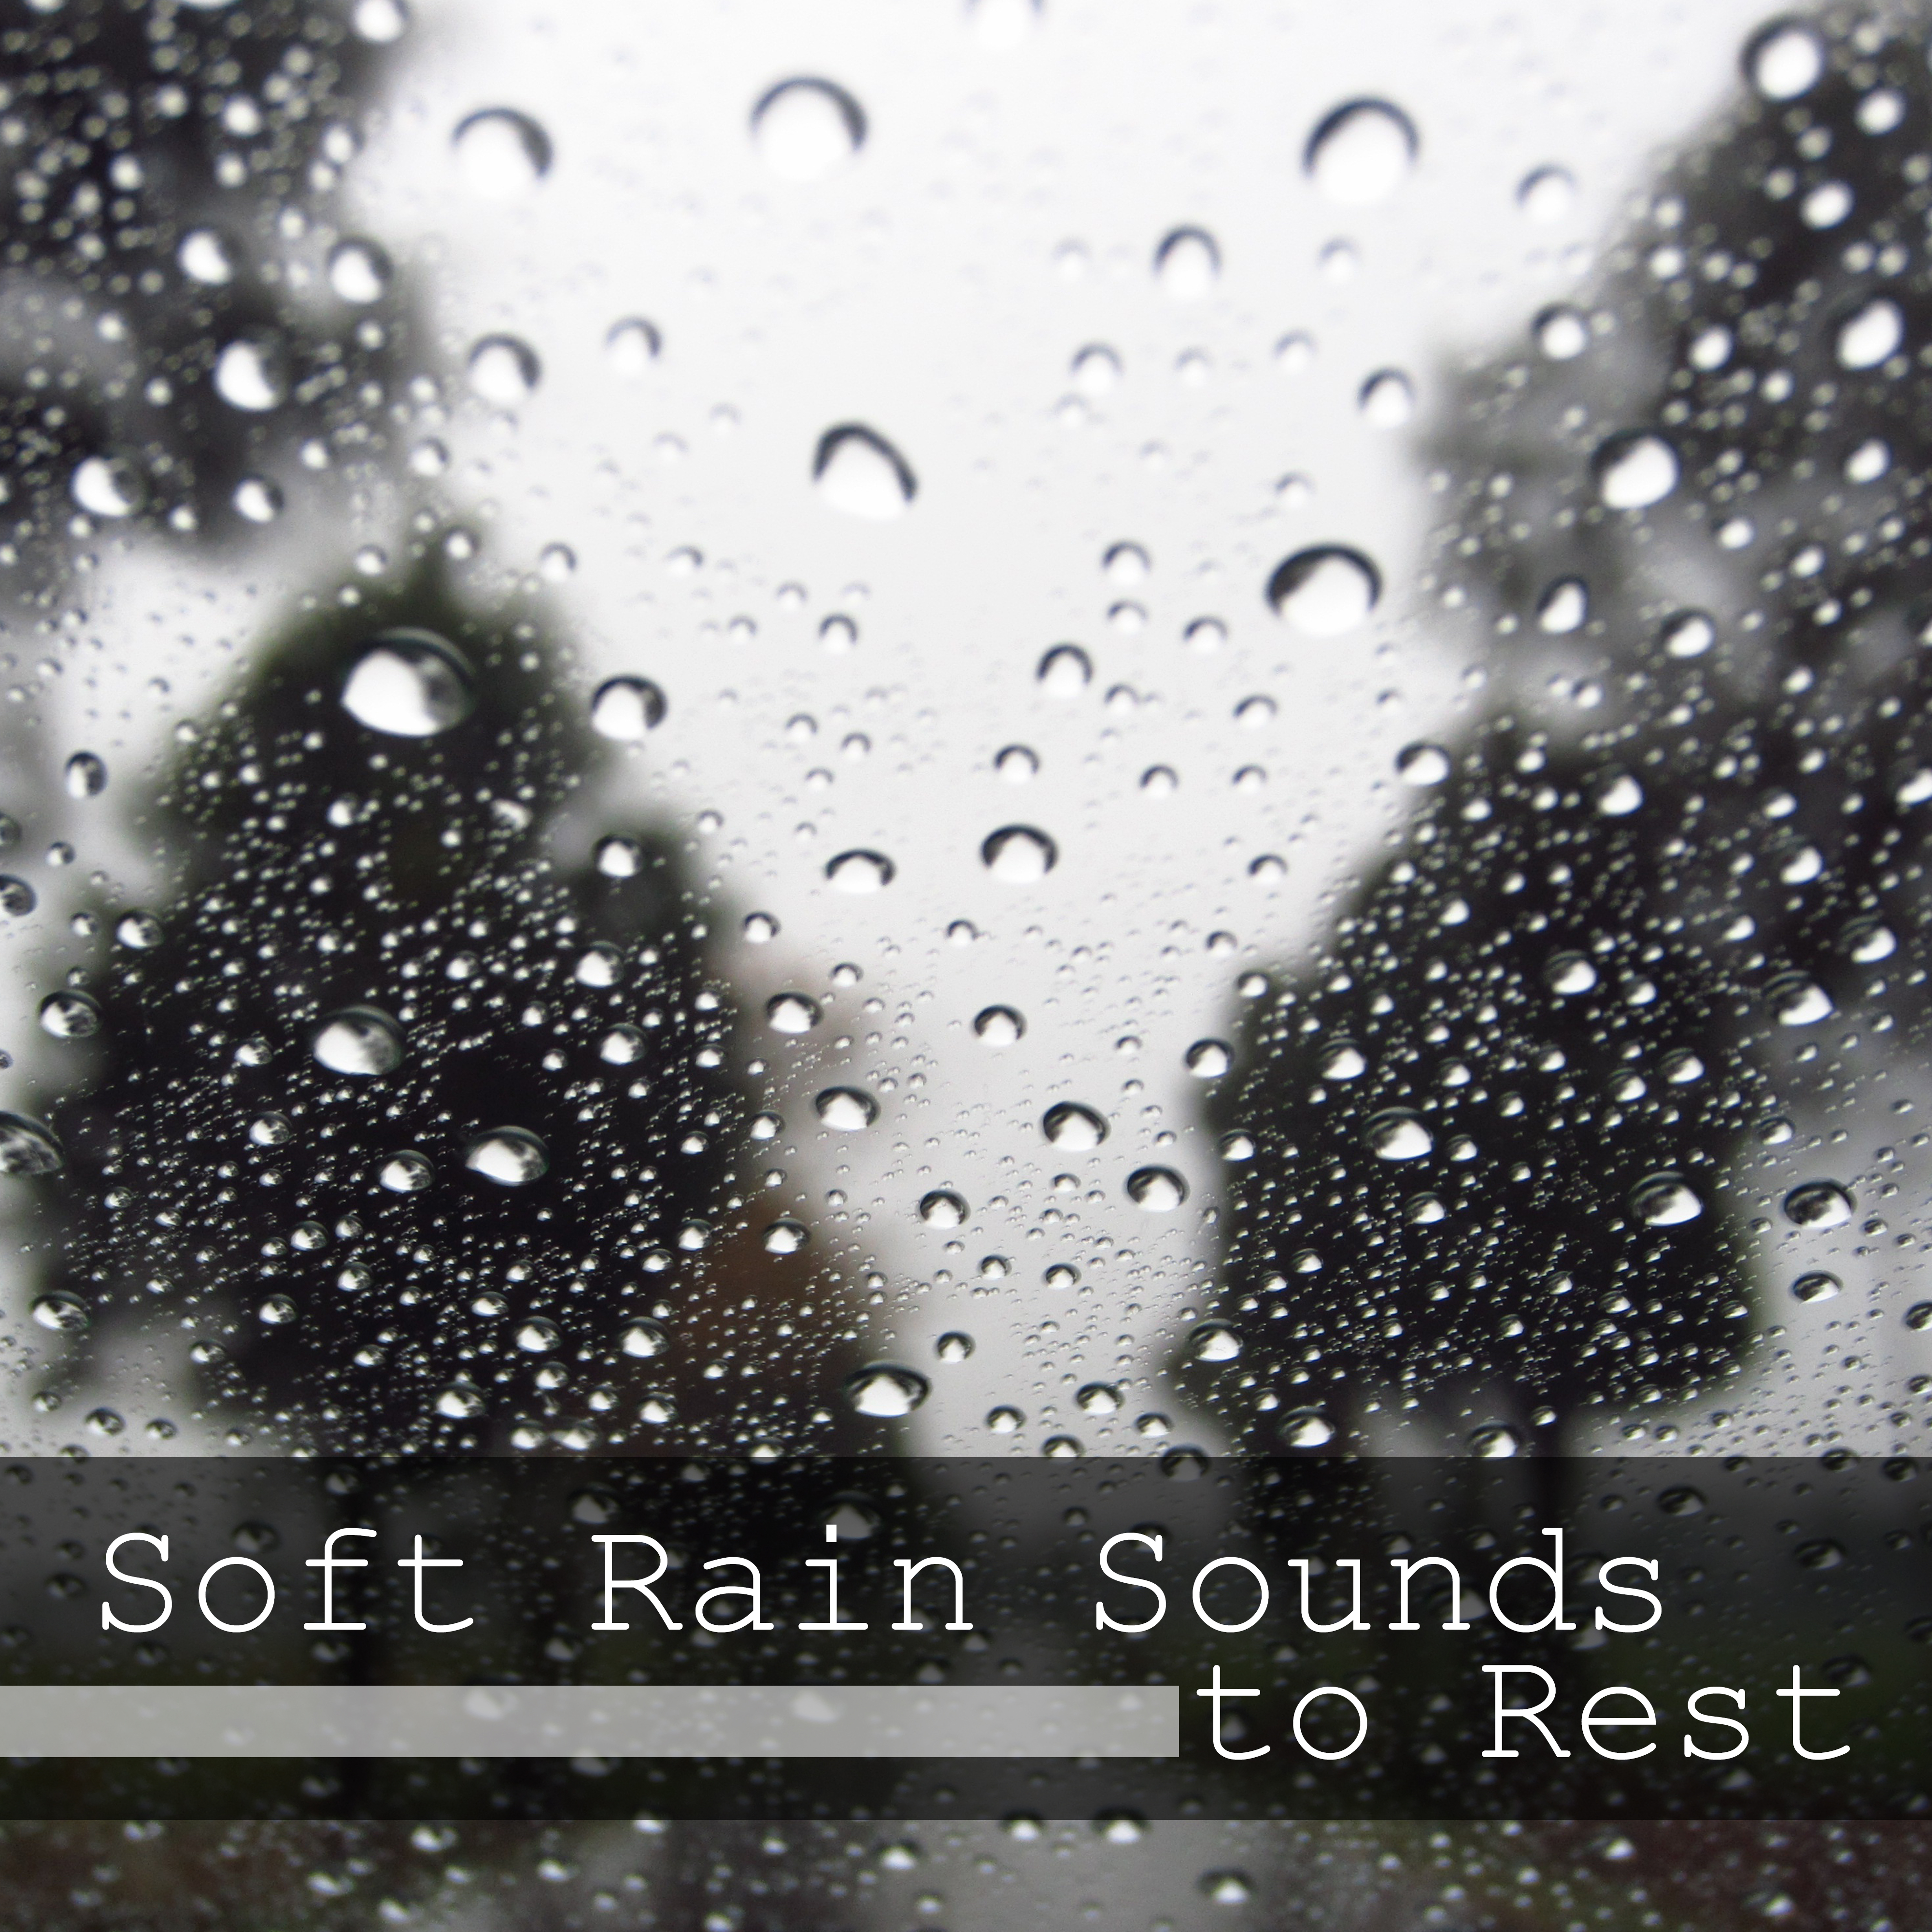 Soft Rain Sounds to Rest – Calming New Age, Rest with Nature Sounds, Healing Waves, Inner Silence